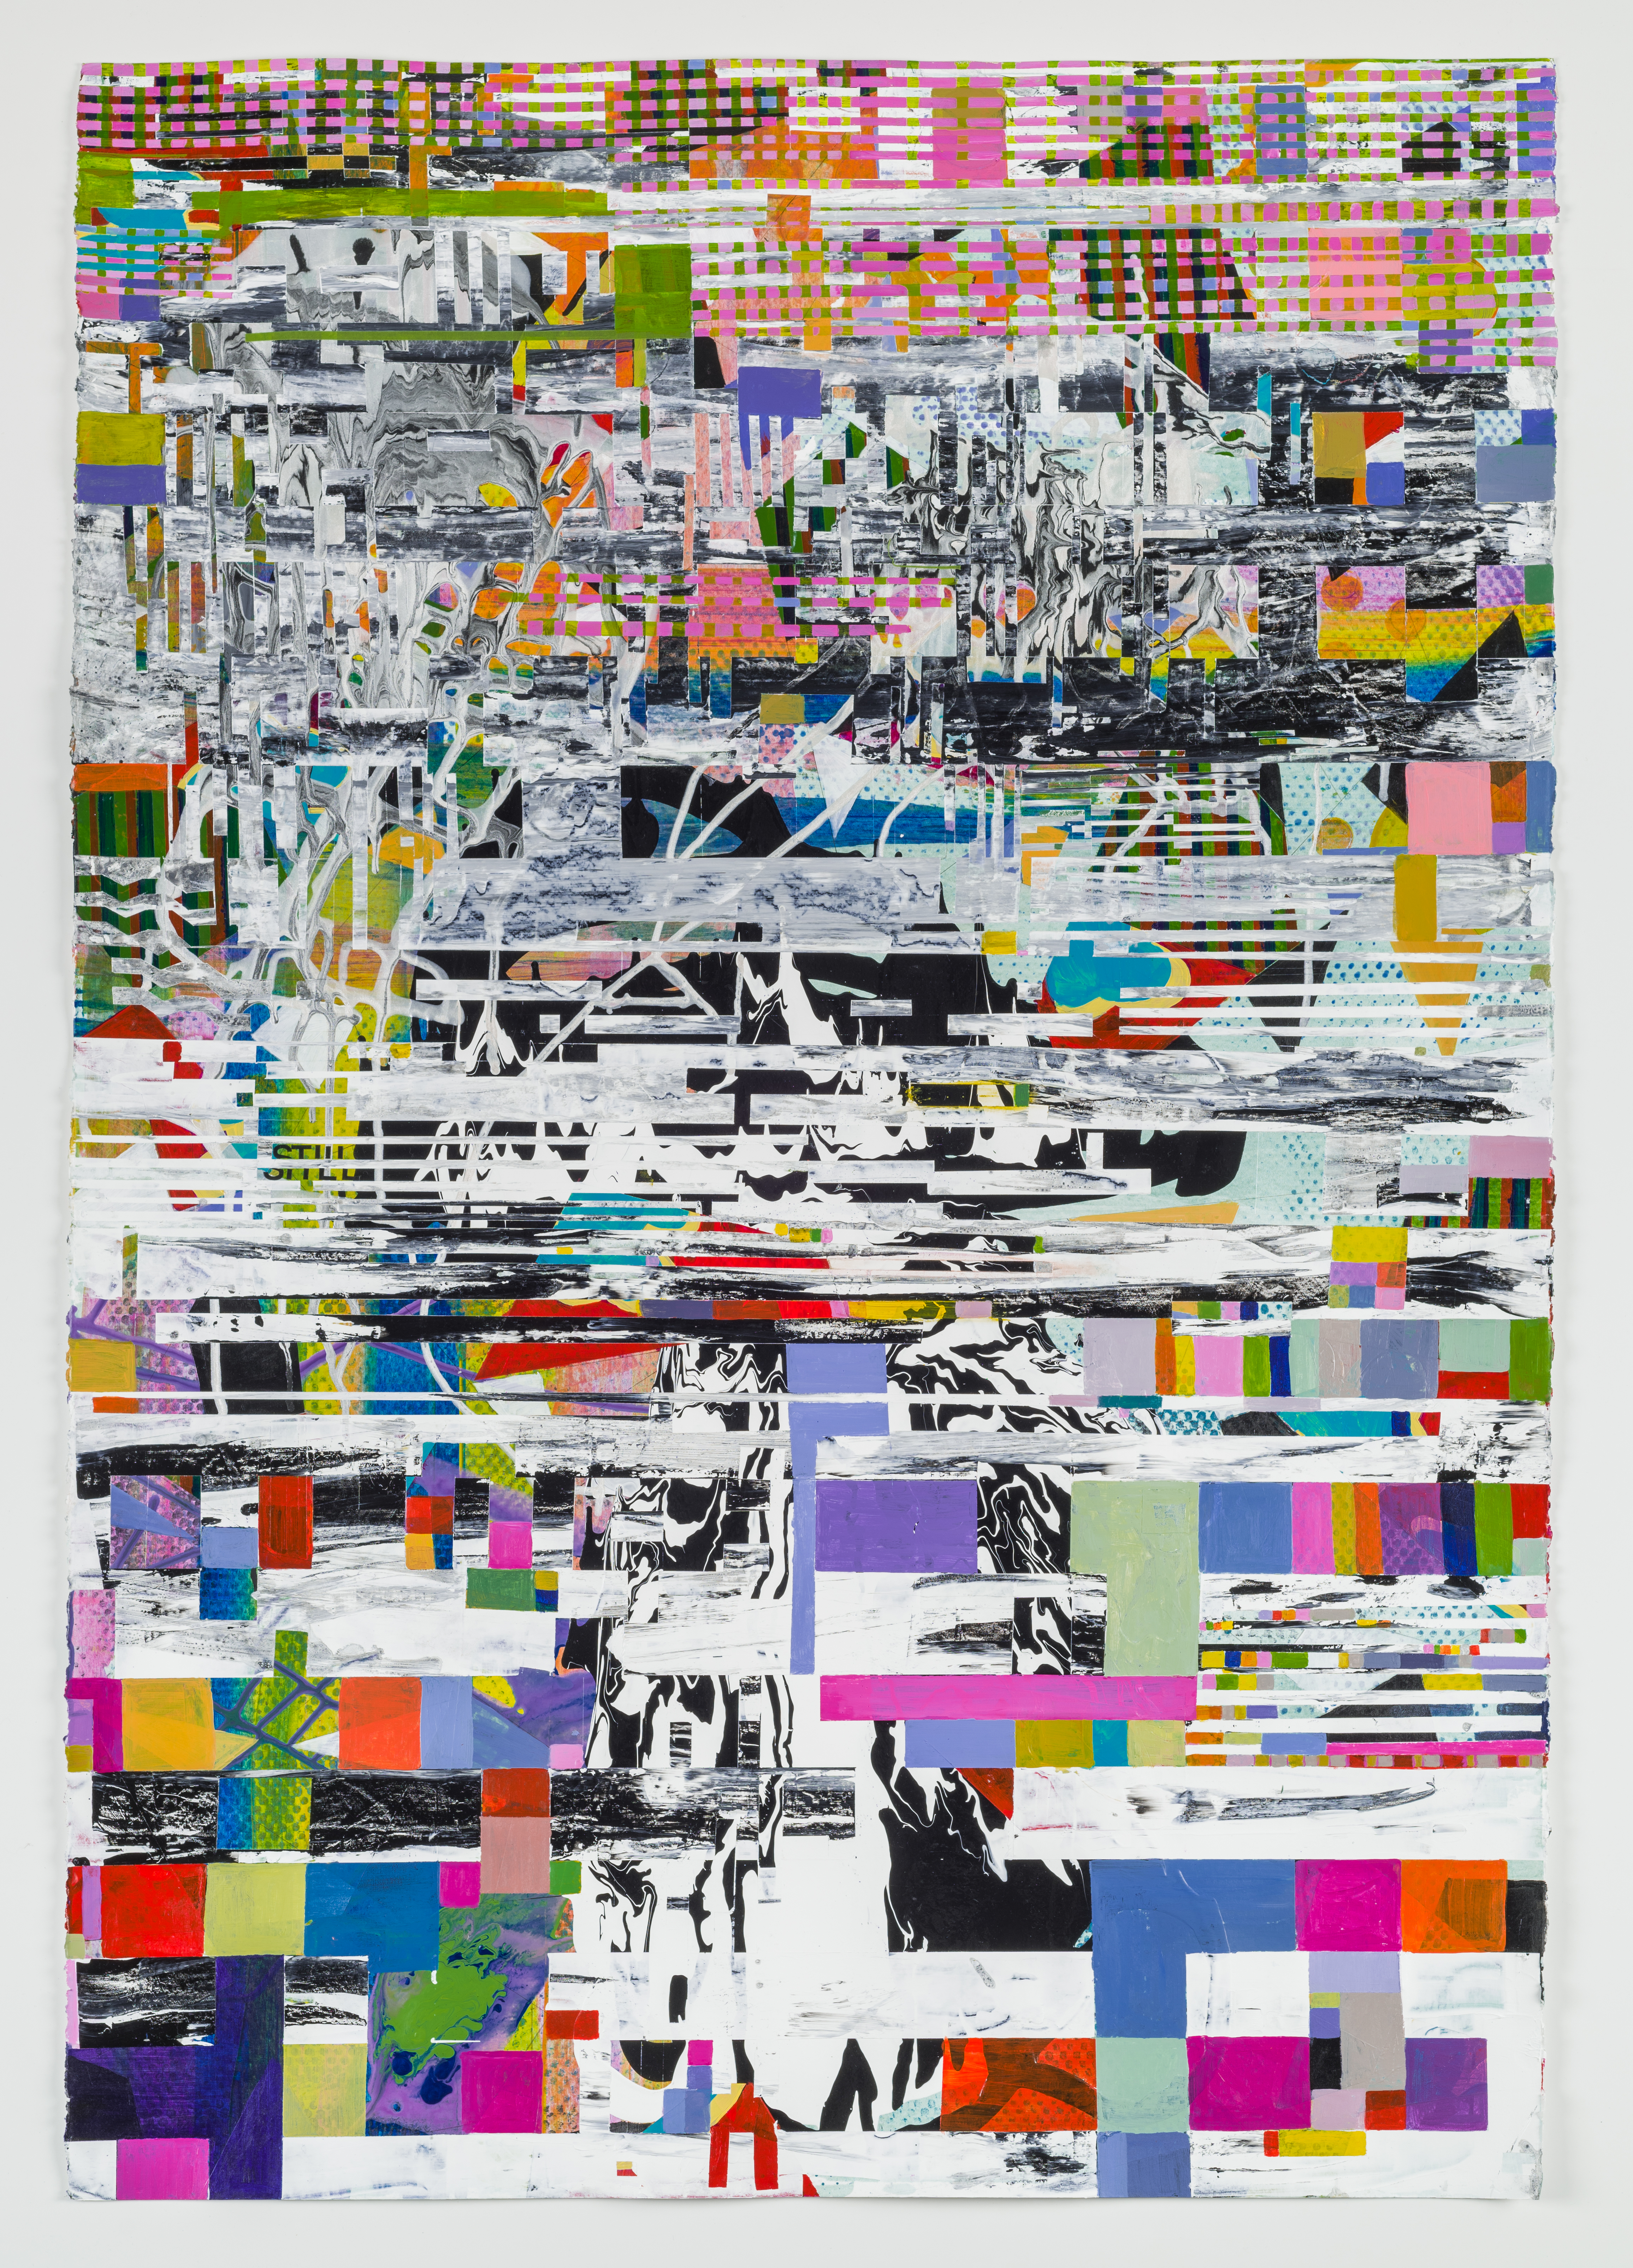 Abstract painting with collage consisting of horizontal bands on a ground of black and white. Rectangular blocks of colors – including red, orange, blue, and purple – combine with patterned areas to create an overall fluid image.